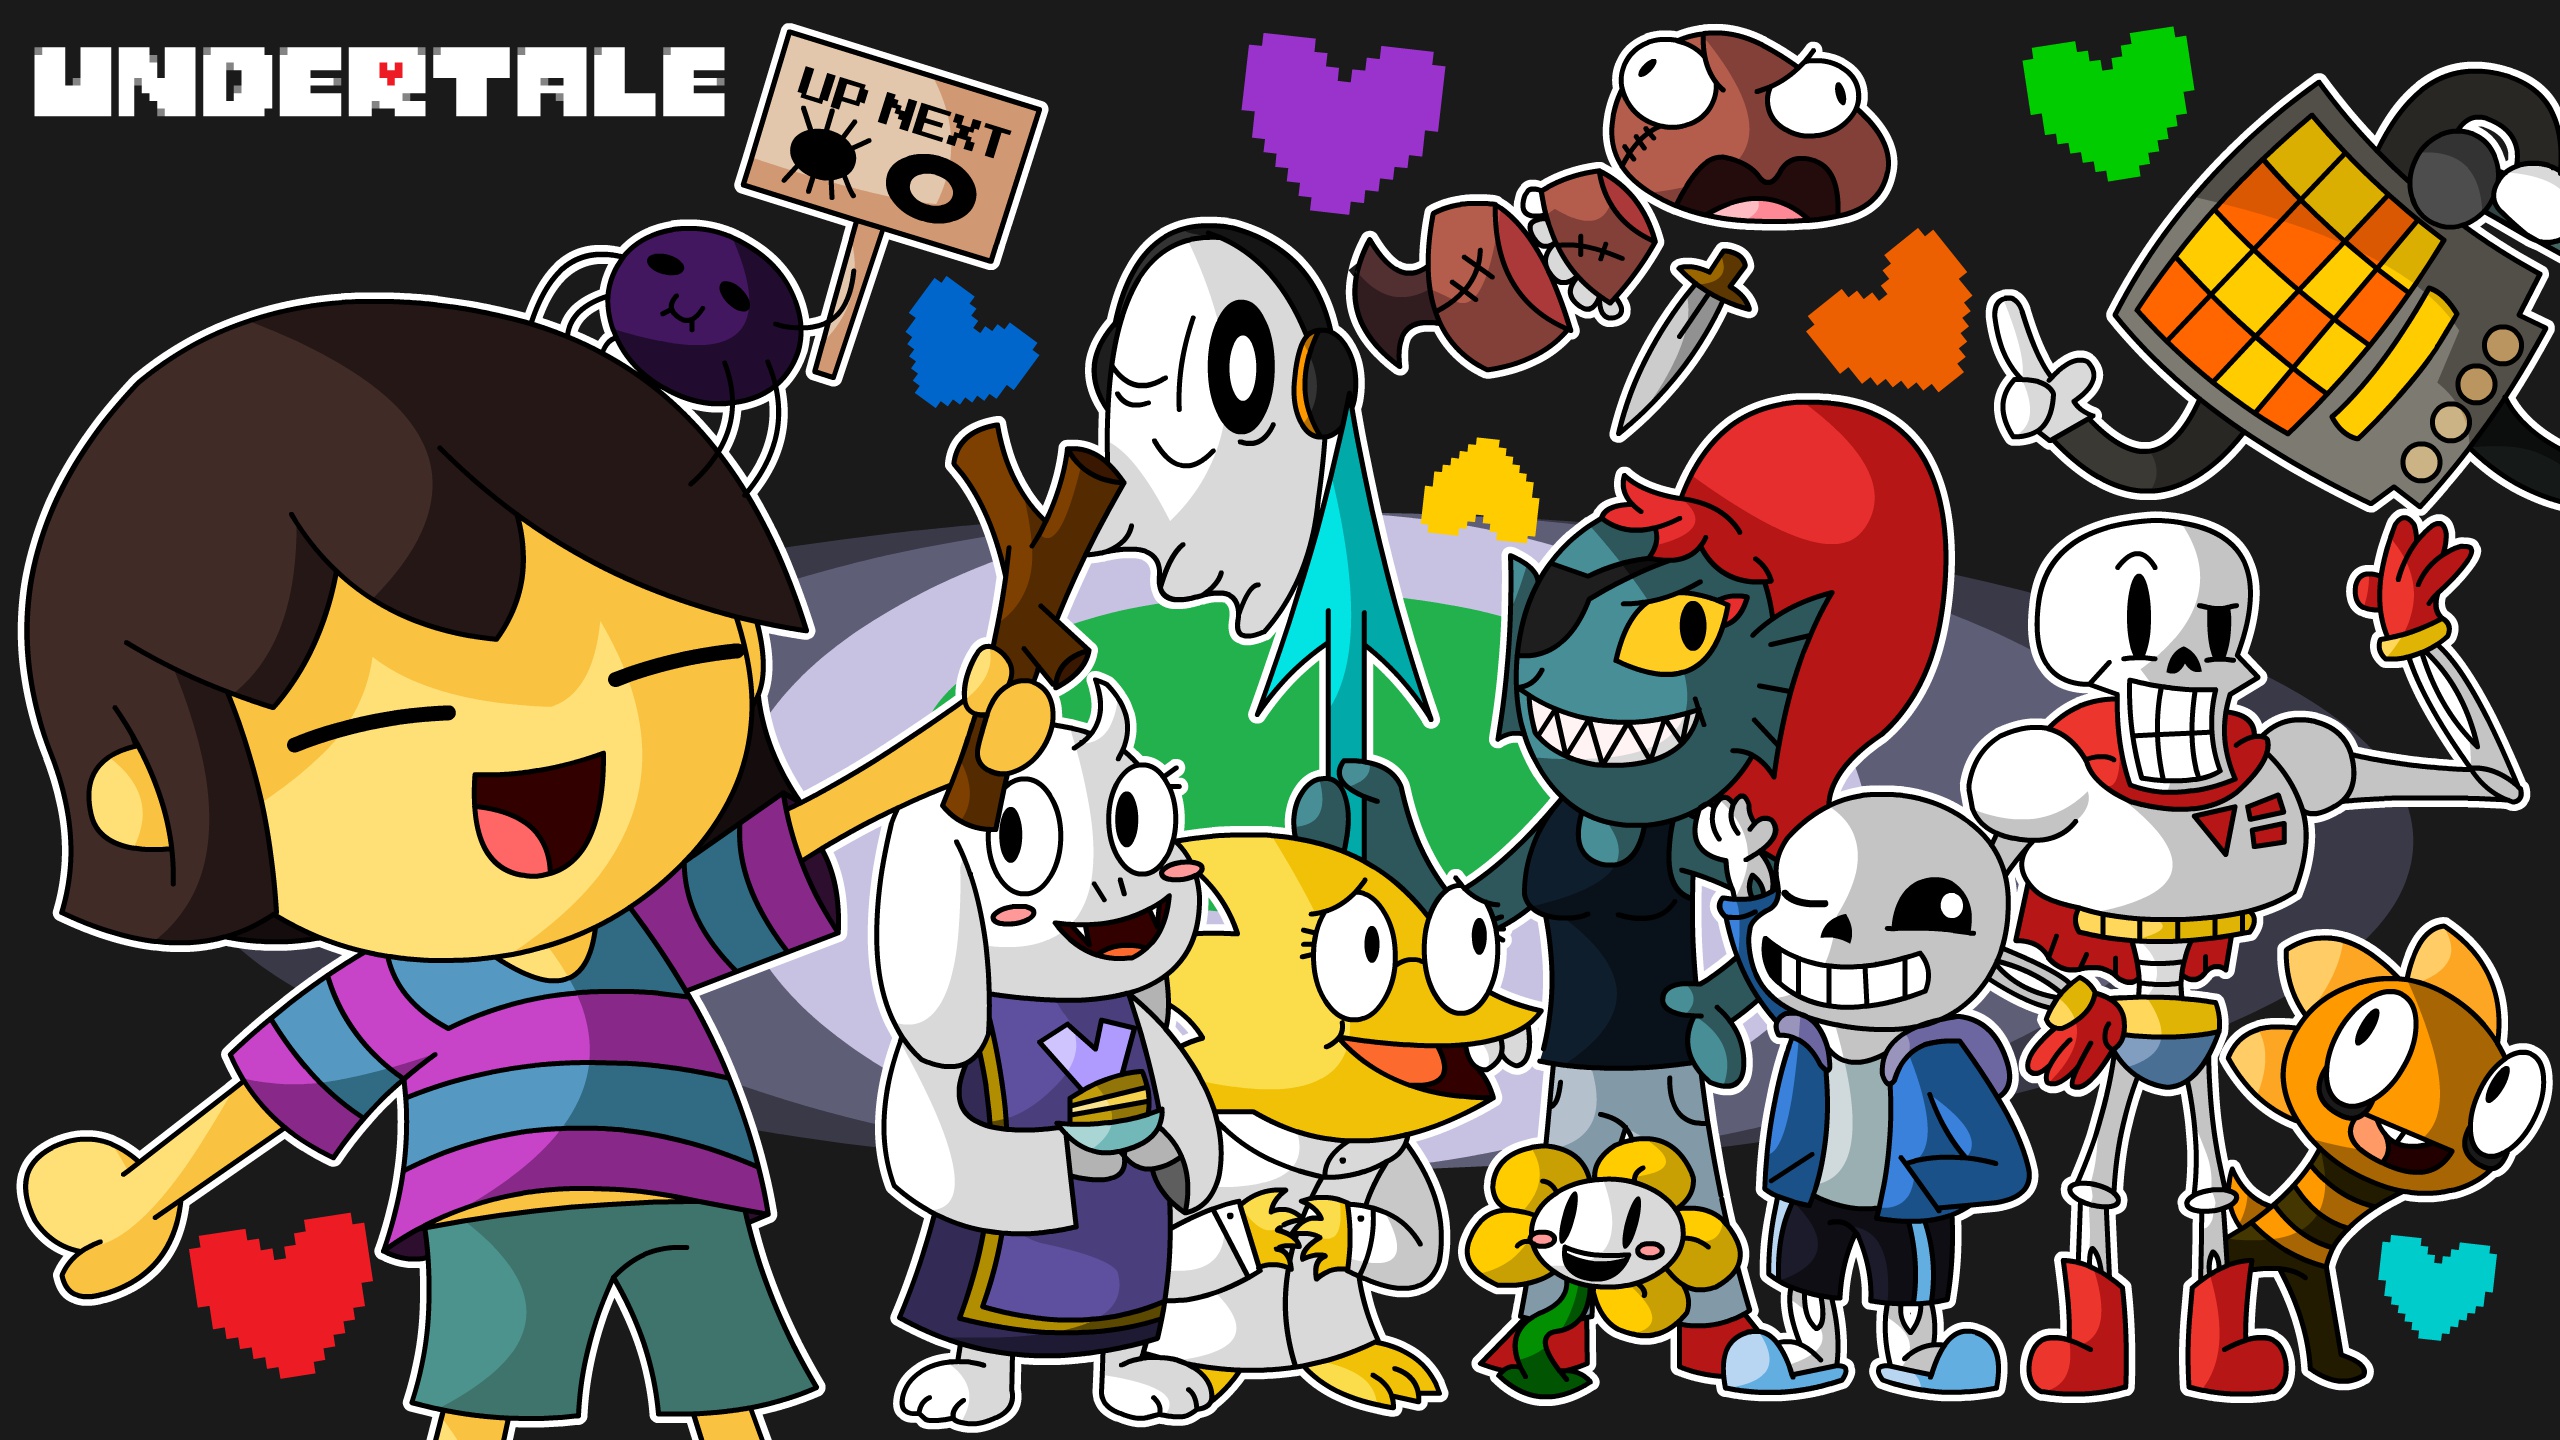 Undertale bits and pieces steam фото 38